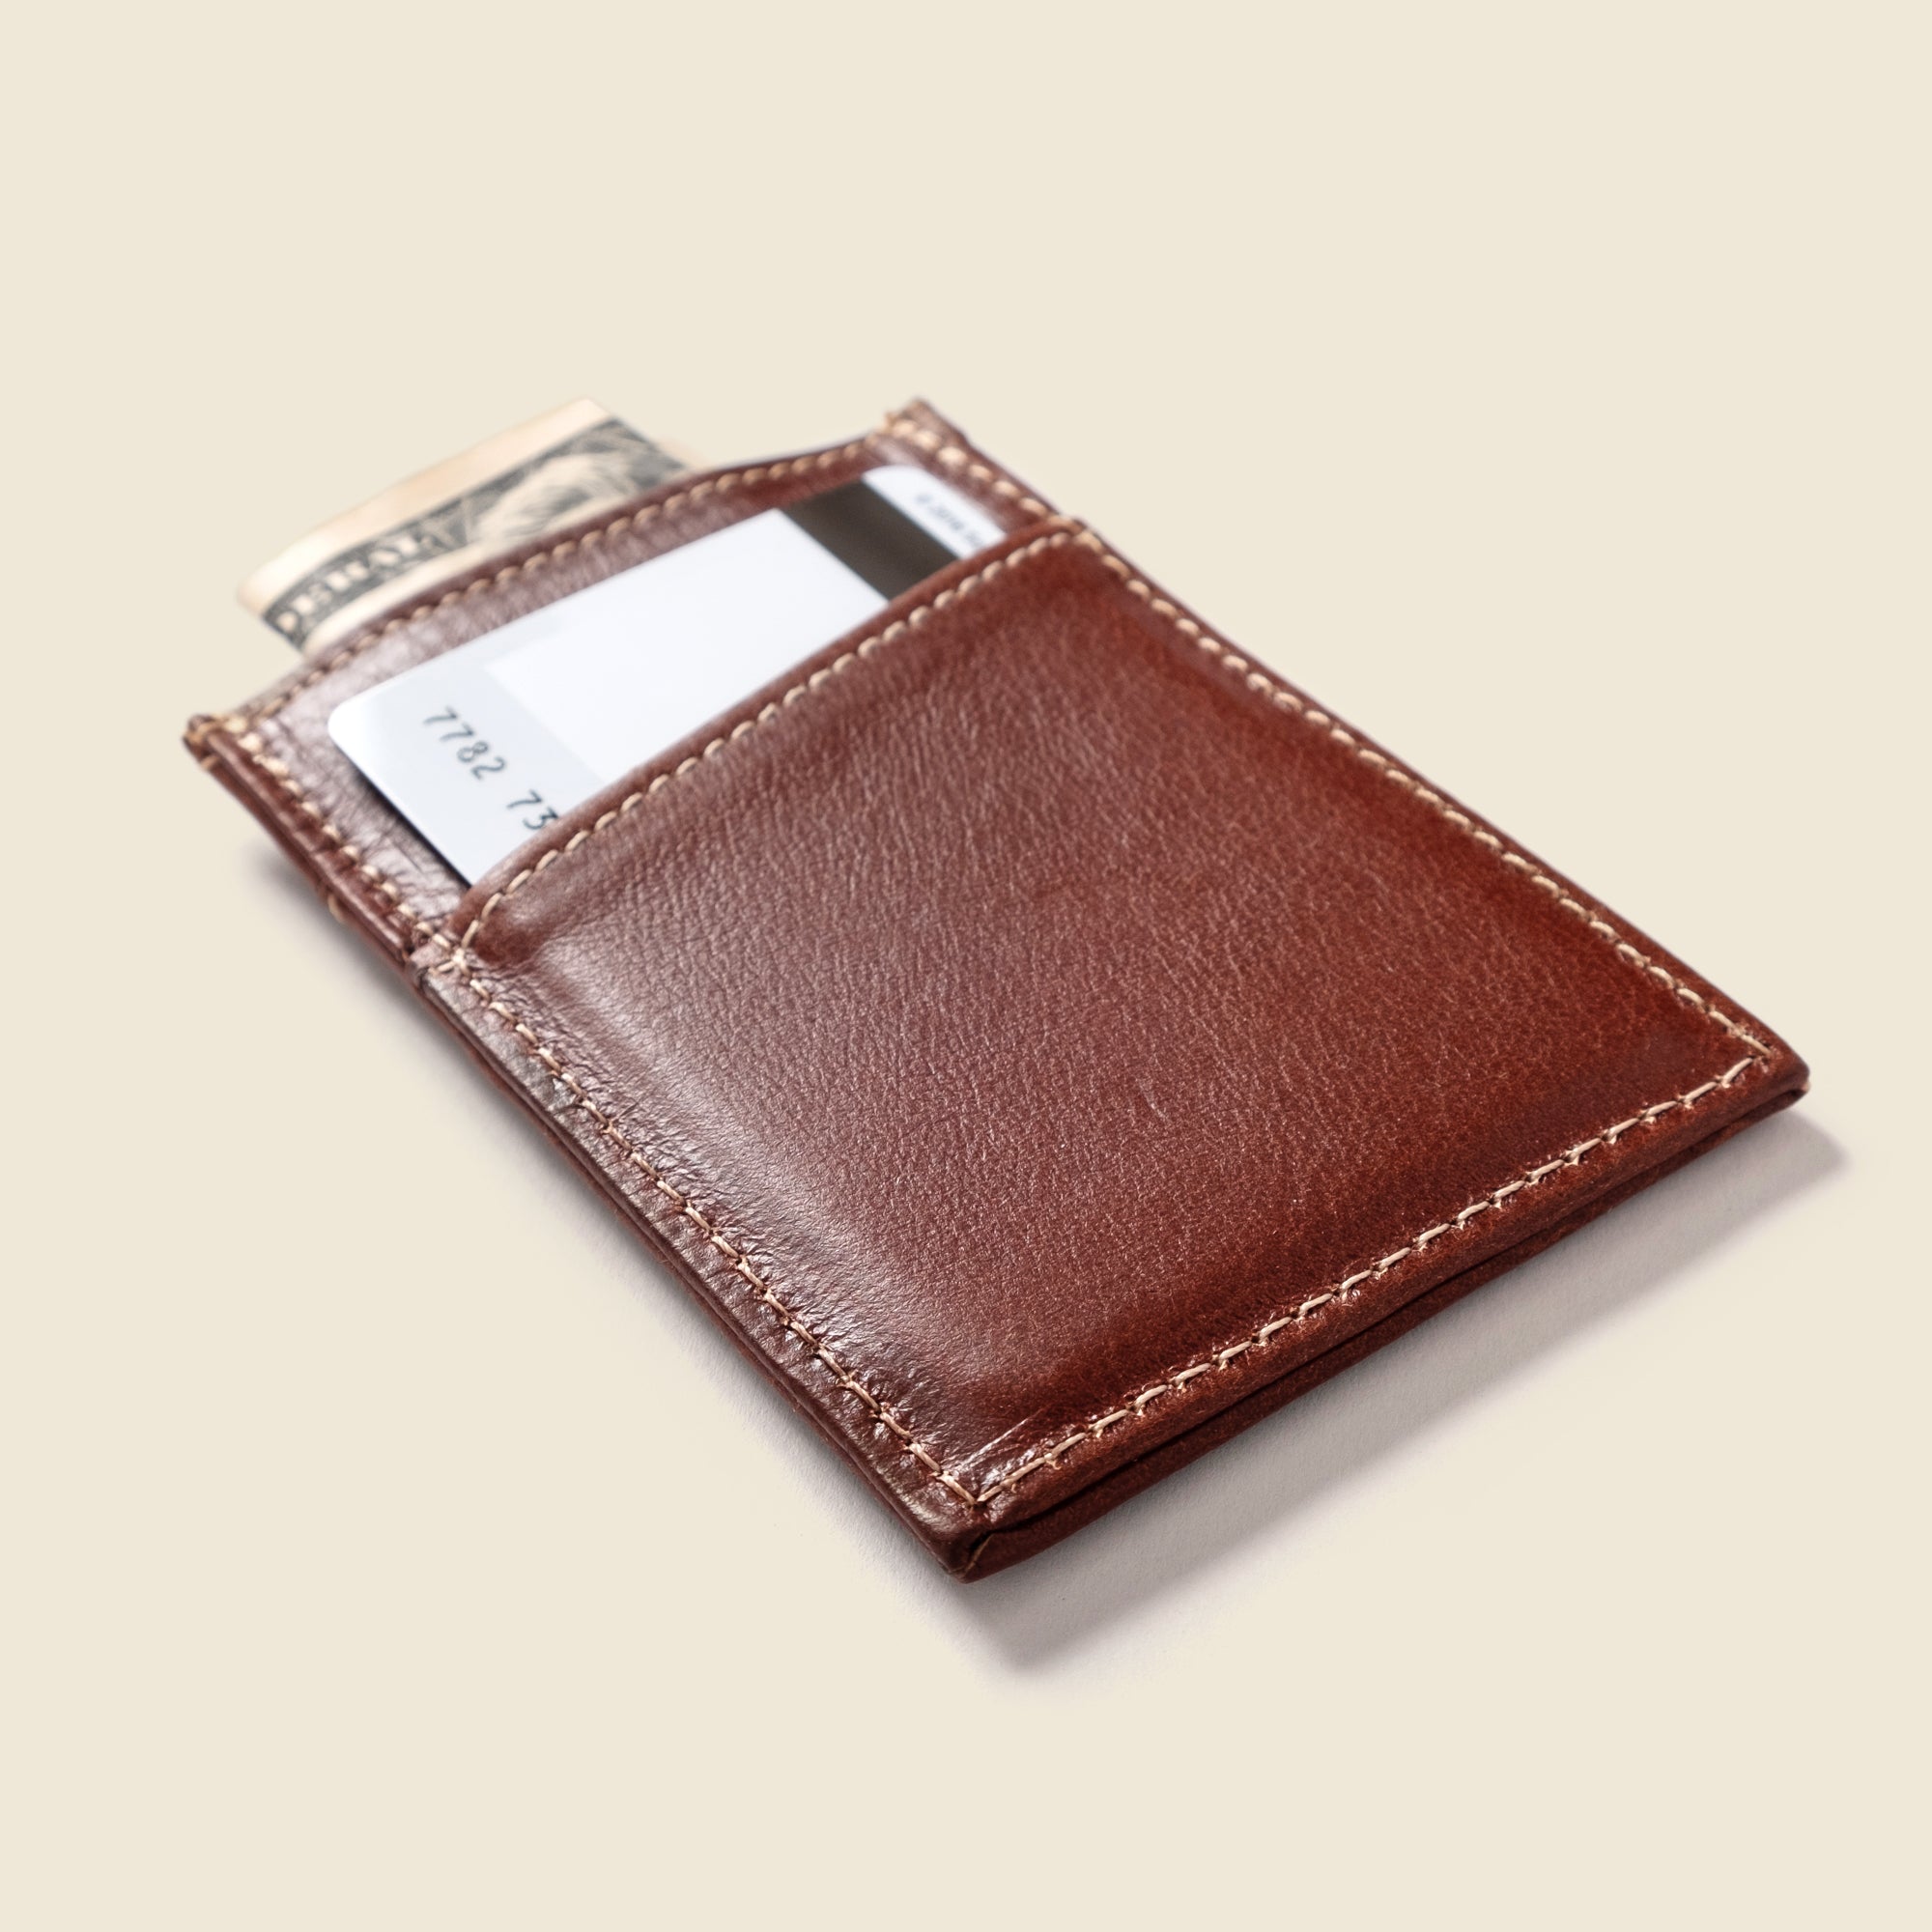 Brown leather small cardholder wallet for guys